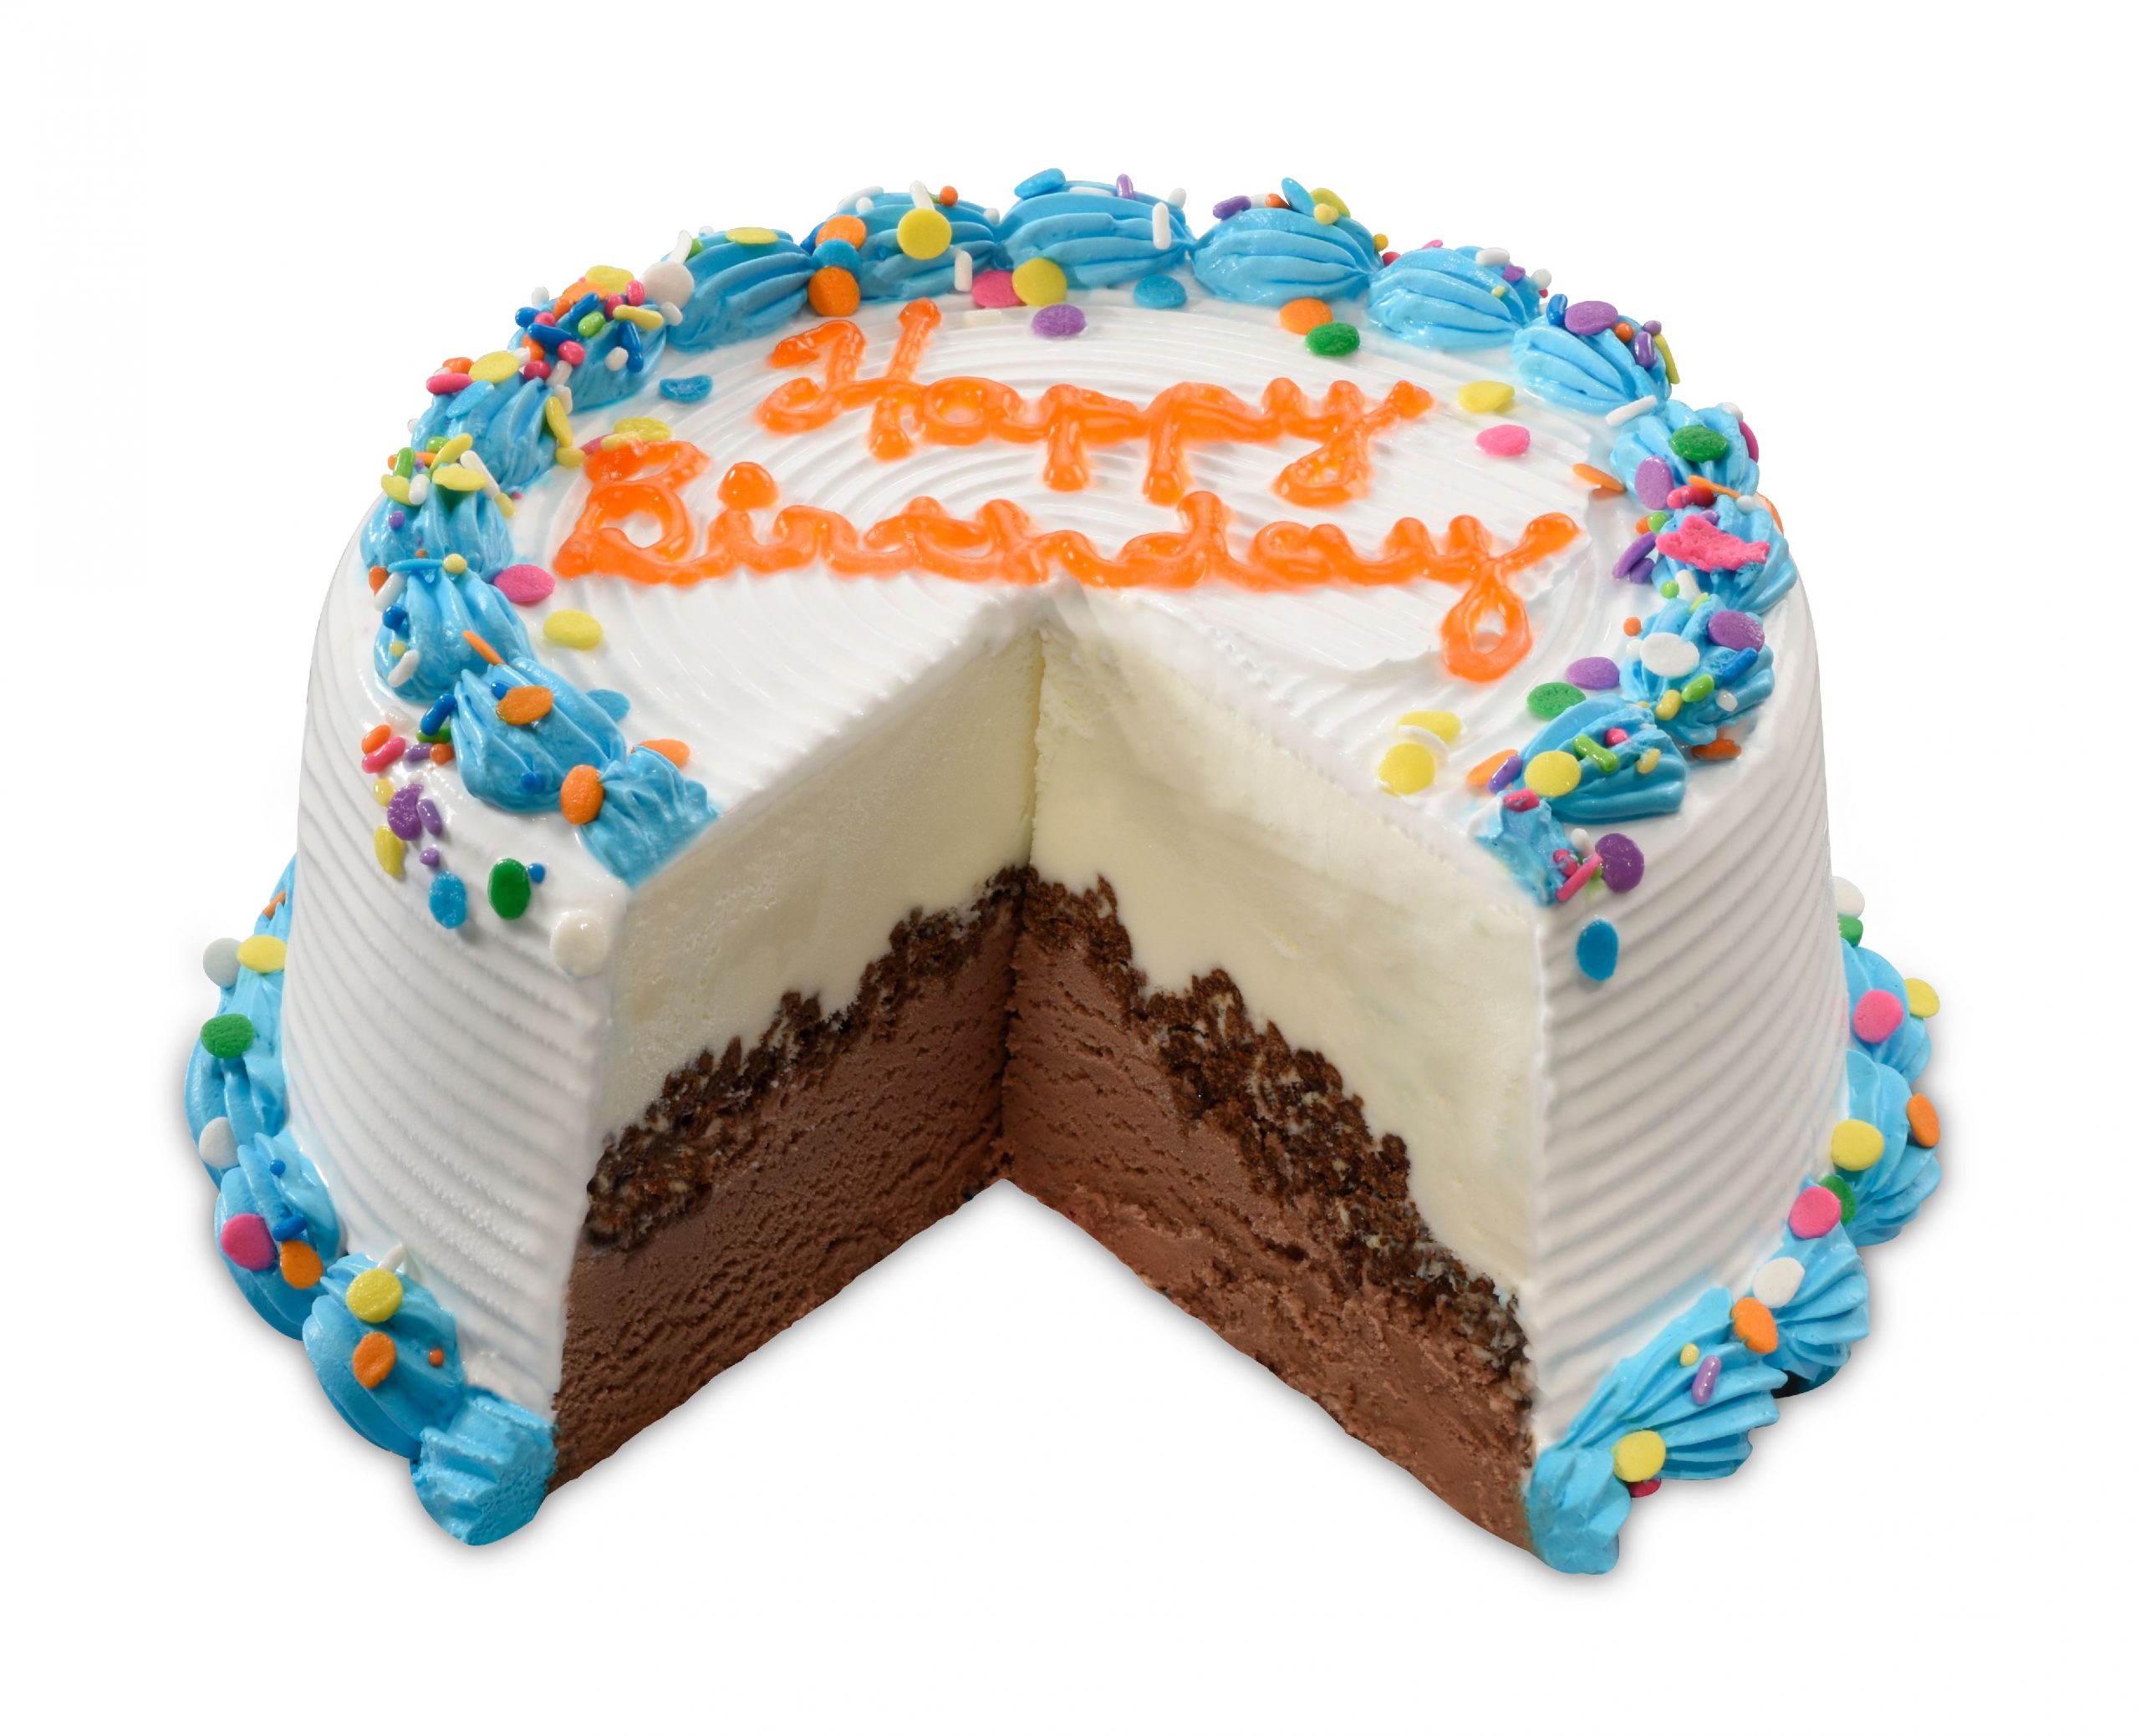 What Stores Sell Carvel Ice Cream Cakes